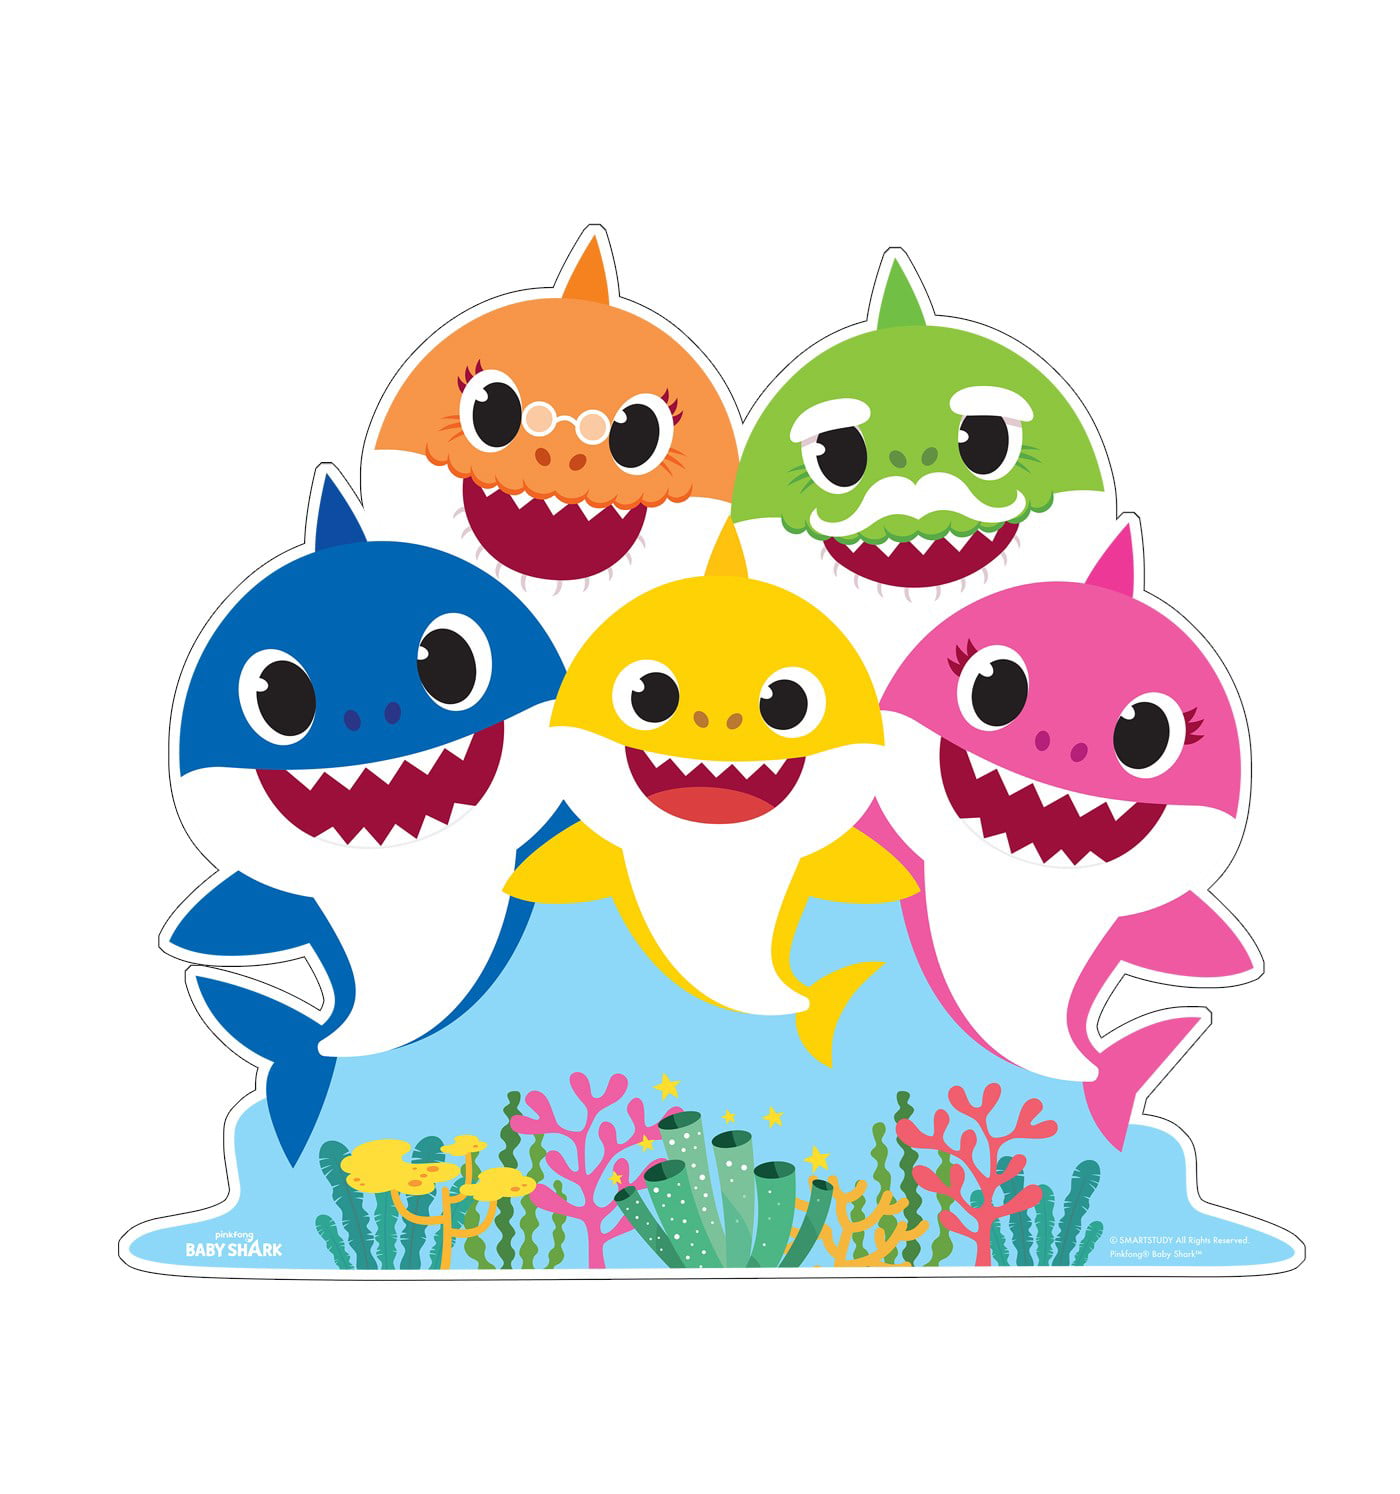 Baby Shark Family Cardboard Stand-Up, 3.5ft, Motion-Activated Music